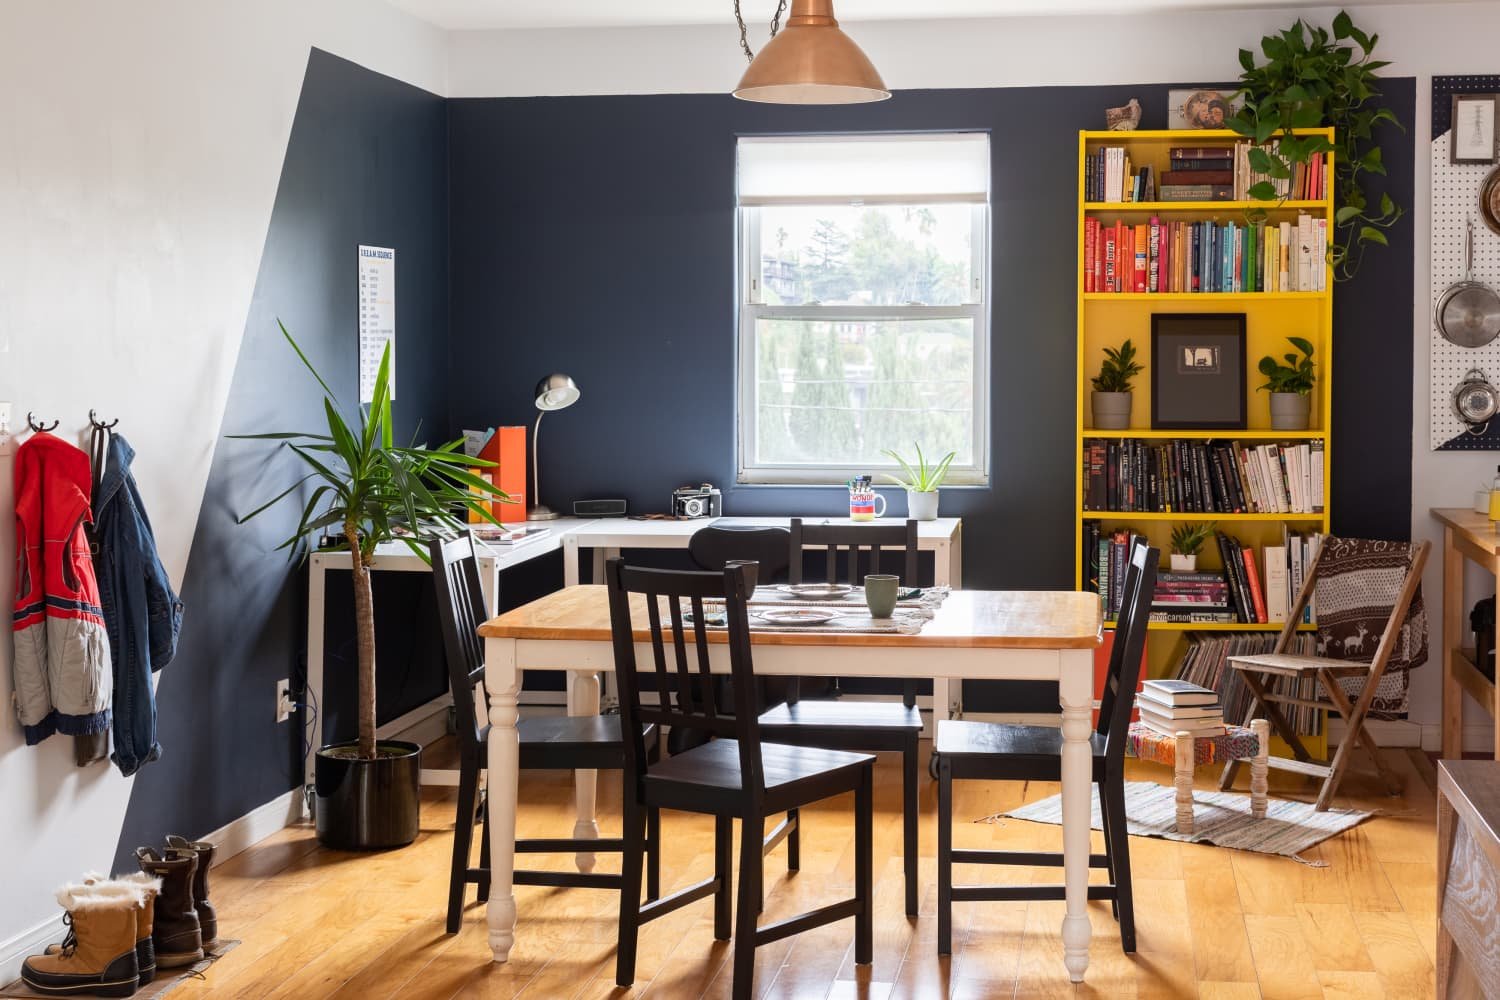 These 6 Design Pros Share the Biggest 'Don'ts' of Organizing Your Home